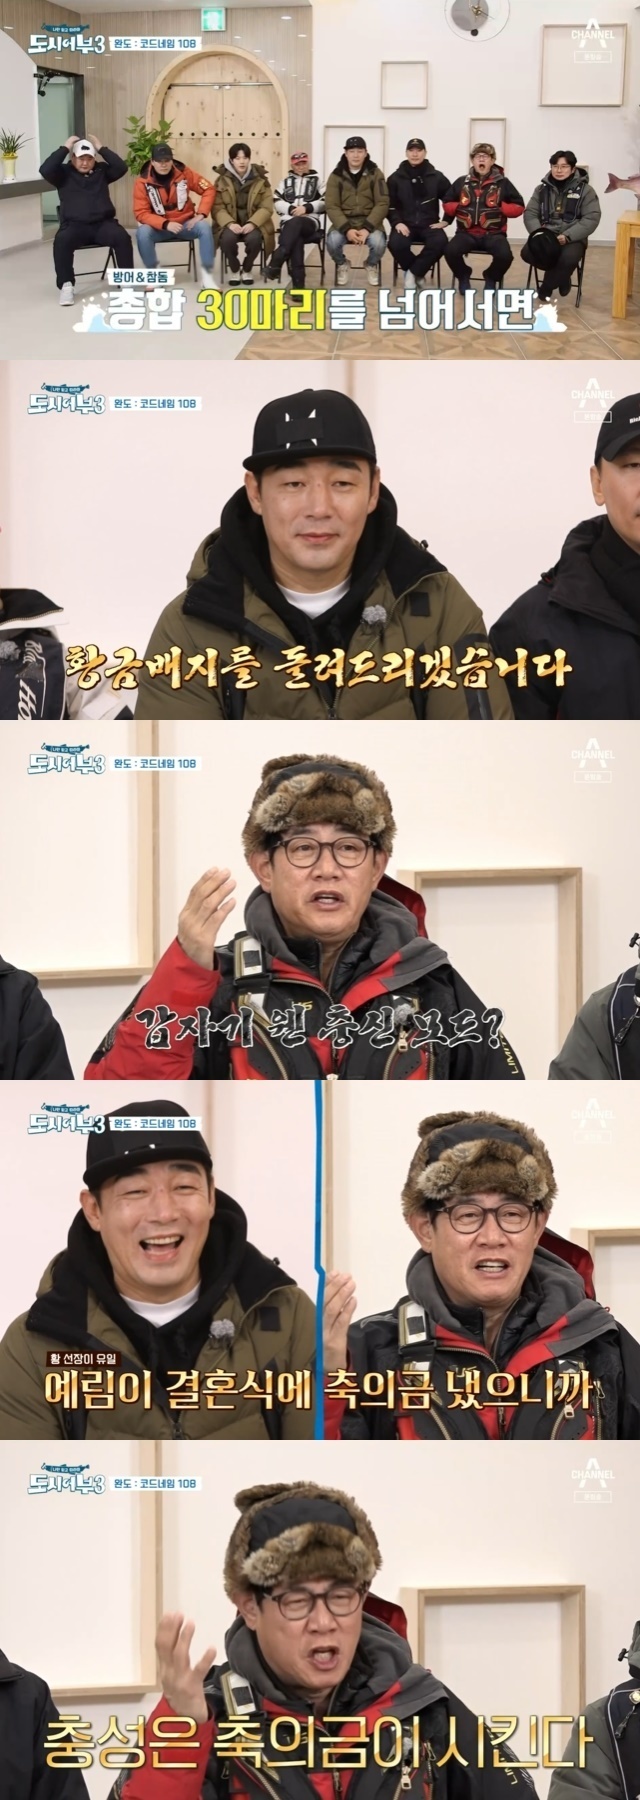 Lee Kyung-kyu has revealed his faith, trust and affection for Hwang Seon-jang.In the 35th episode of Channel A entertainment Follow Me Only, and The Fishermen and the City Season 3 (hereinafter referred to as The Fishermen and the City 3), which was broadcast on January 13, there was a confrontation between Jeonnam Wando Champo and defense and Bushi fishing with the head of Brand New Music, Rimer and DAY6.The fishing match was also played by Hwang Seon-jangs Revenge match.Jang PD promised Hwang Seon-jang, who was deprived of the golden badge in the last war of the sea bream, I will return the golden badge if I catch more than 30 sea breams this time.On the other hand, Hwang, who has no badge to return if he does not achieve his goal, said, Wando is famous for overturning and Kim. I will give all the staff.Jang PD, who had 100 staff, was also confident in his words.Lee Kyung-kyu said, I am abalone and a mackerel (take it). I believe in Hwang Seon-jangs personality and ability. Suddenly, he showed a different affection for Hwang Seon-jang.Soon Lee Kyung-kyu laughed at the reason, saying, Hwang is the only captain who has paid a congratulatory fee for my daughters wedding.Lee Soo-geun said, Do you know all that? Lee Kyung-kyu said, If I can not catch all 100kg, I will fill my whole body.